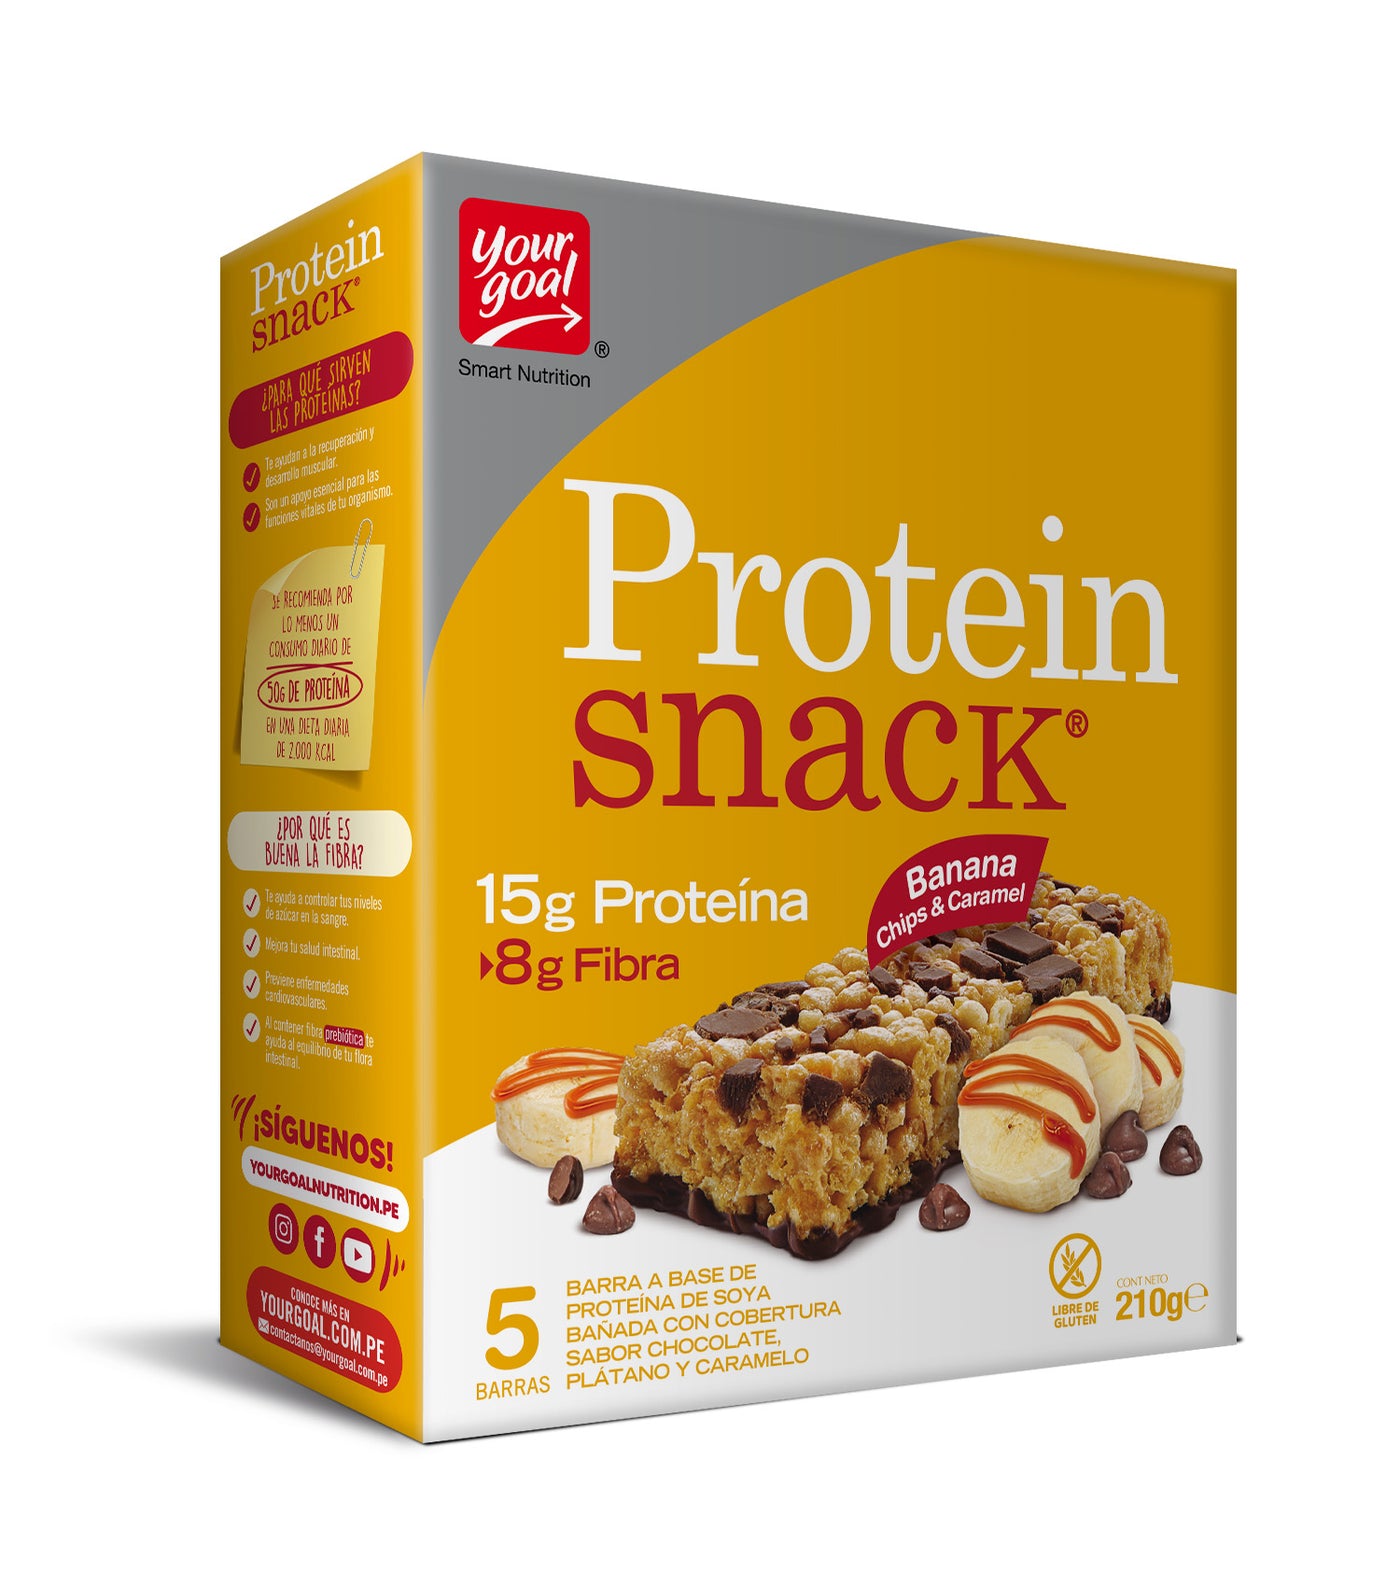 PROTEIN SNACK BANANA CHIPS & CARAMEL - DISPLAY x5UN 42g